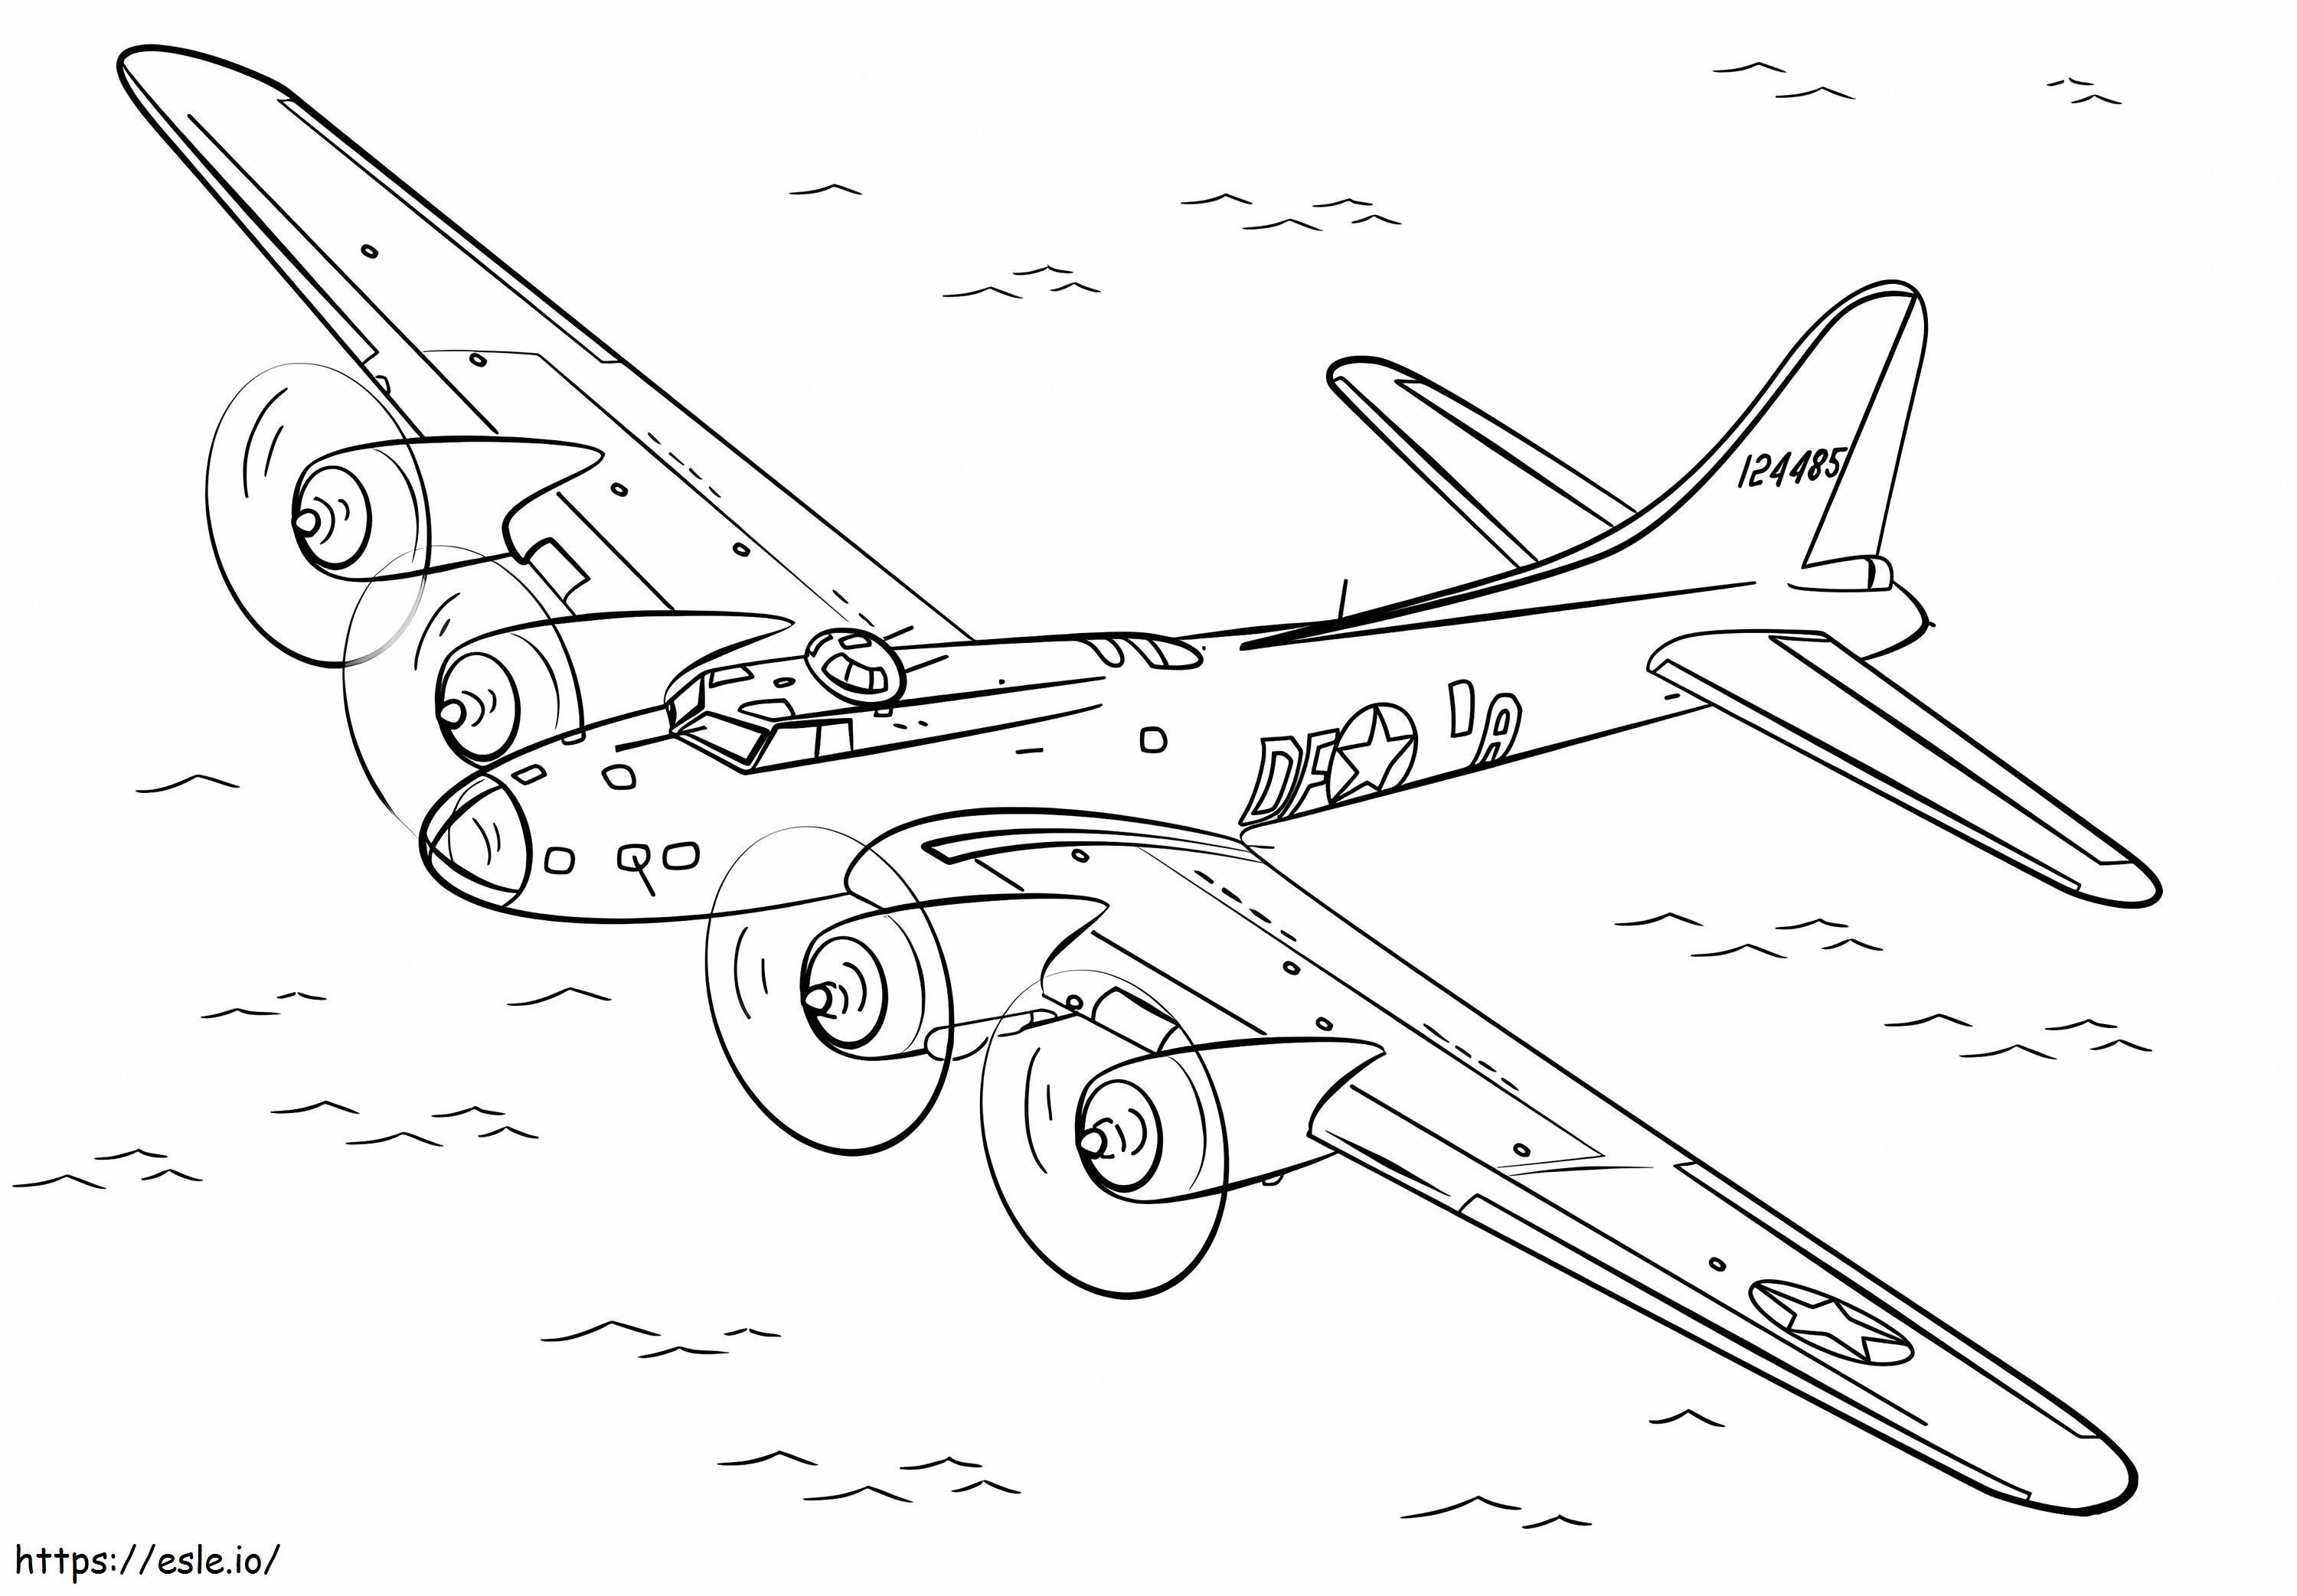 B 17 Flying Fortress Aircraft coloring page